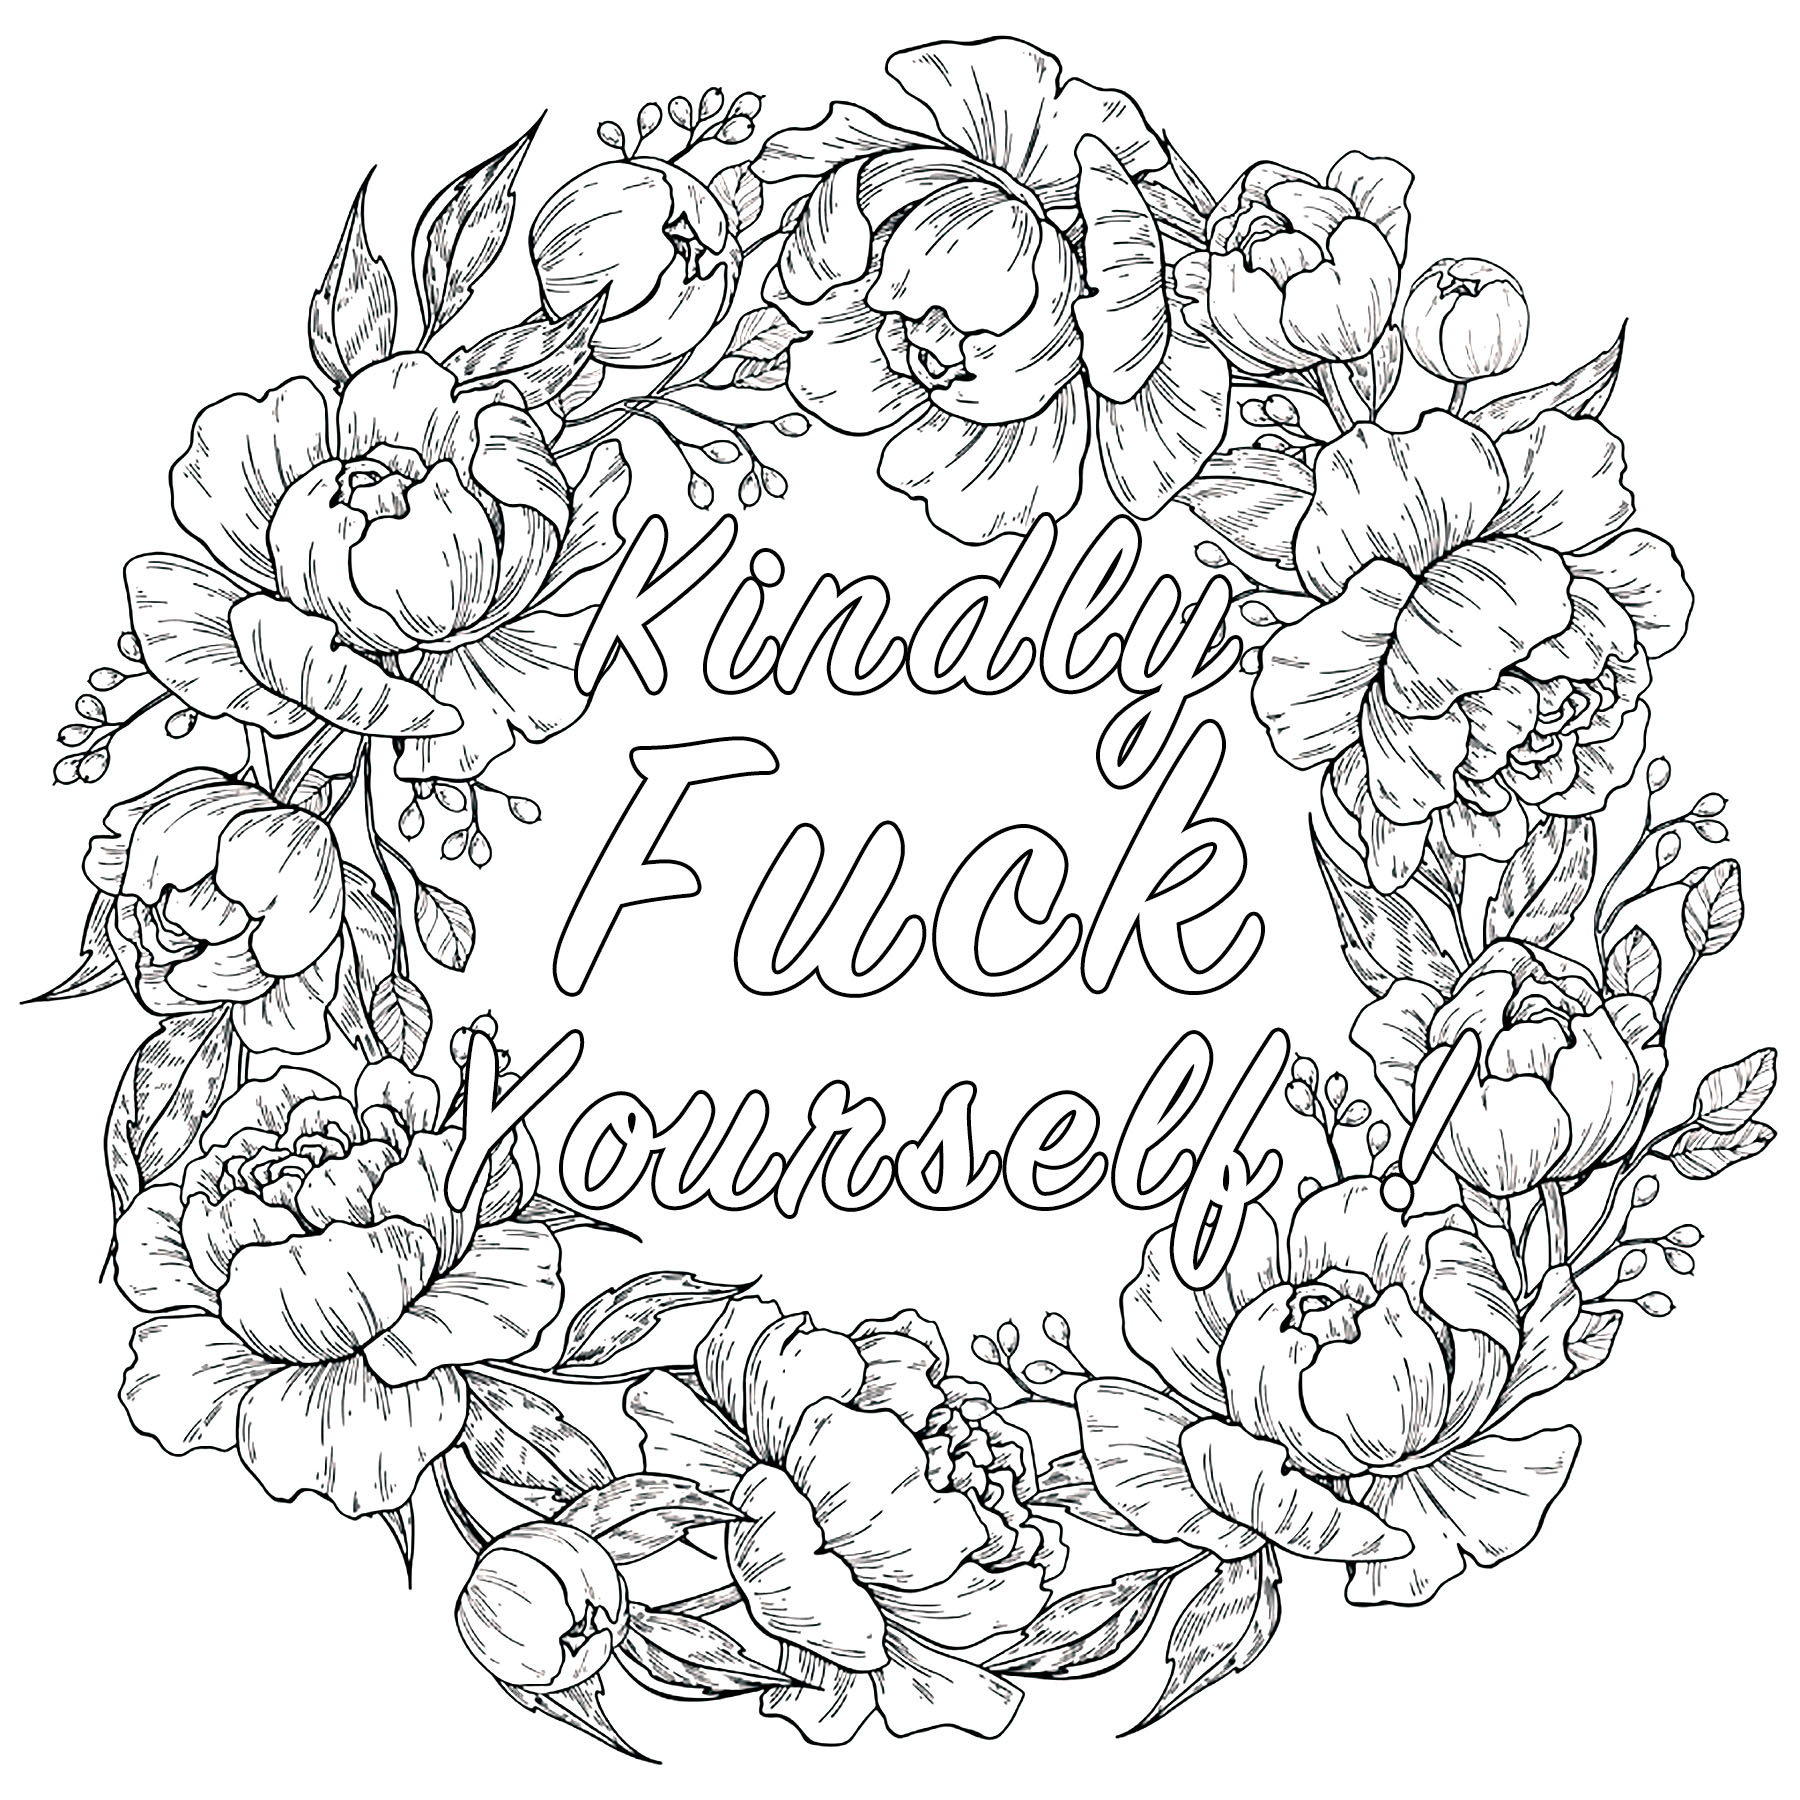 Kindly fuck yourself swear word coloring page